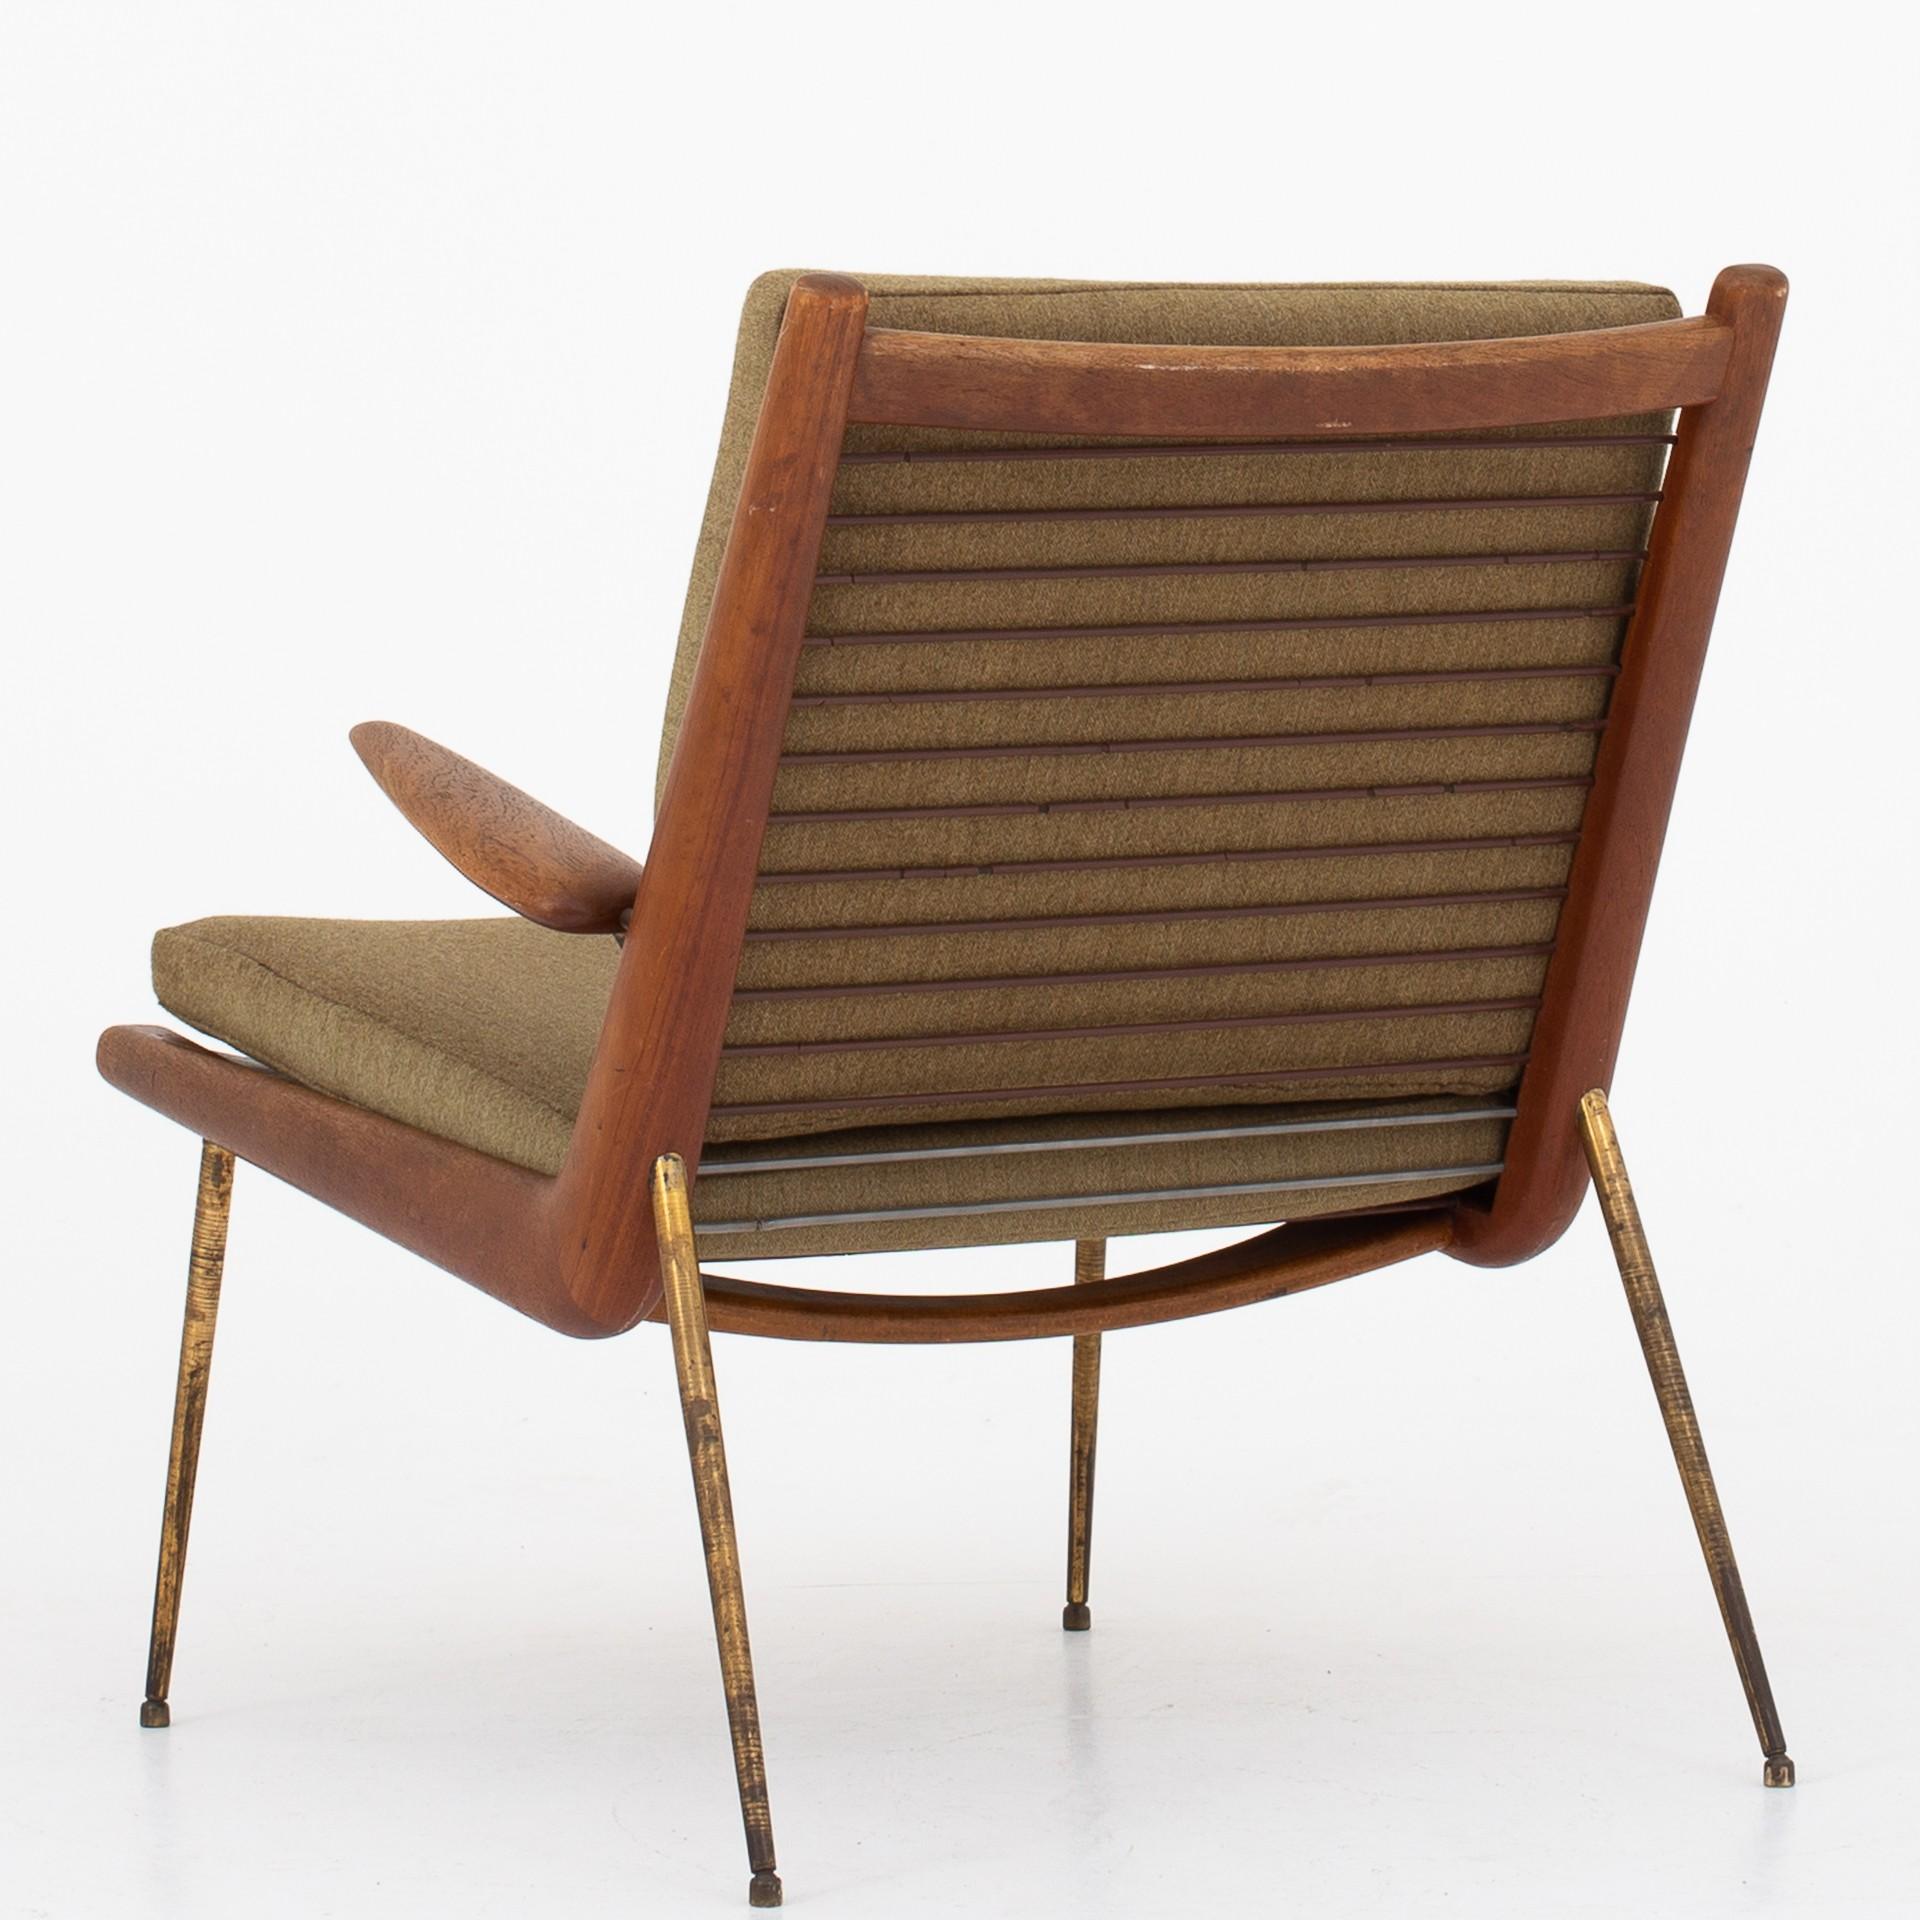 FD 135 - 'Boomerang' easy chair with armrests in teak and legs of brass. Cushions of wool. Maker France & Davorkosen. Designed 1956.